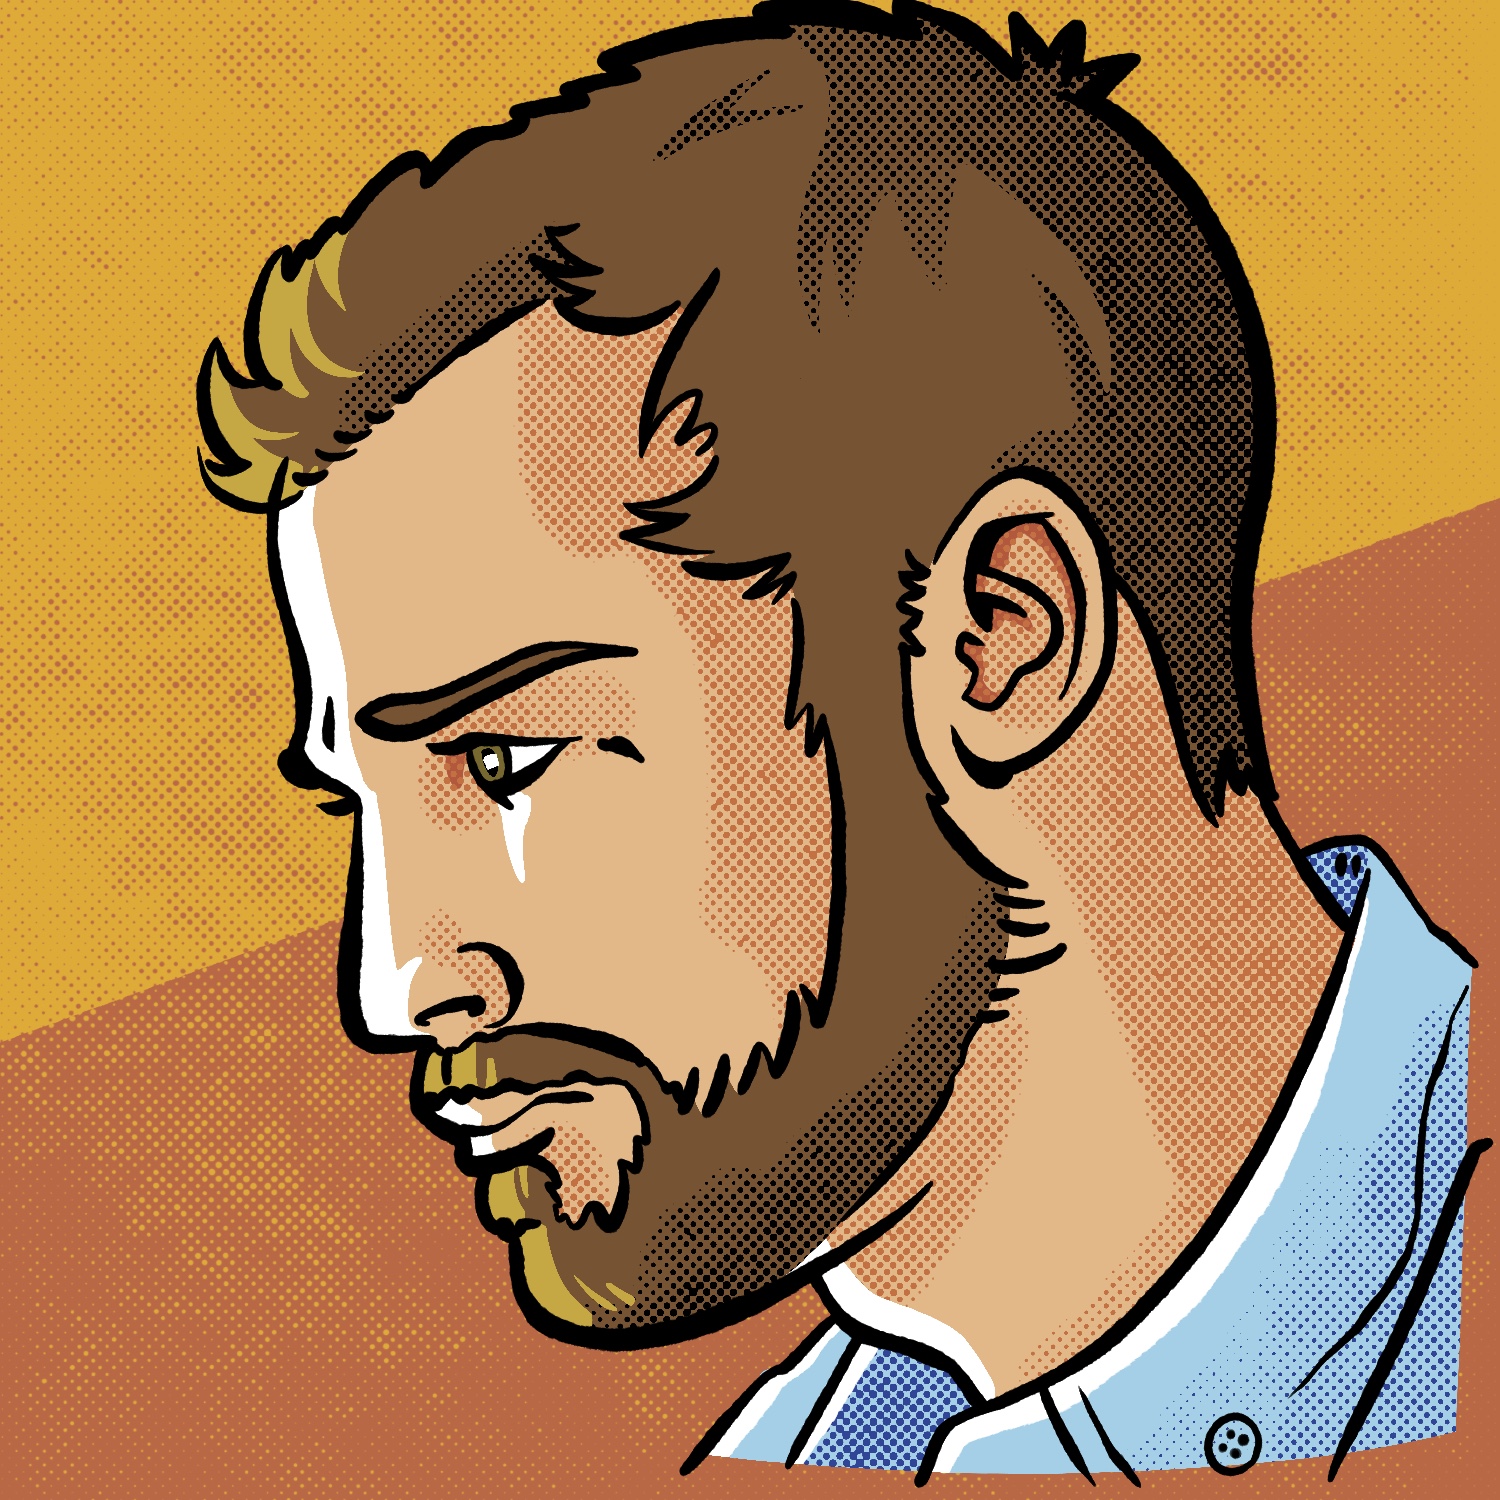 An illustration of a man looking down to the left, at an un-pictured monitor, drawn in comic book style. The man has a light complexion, hazel eyes, and brown hair. He has a mustache and beard, and is wearing a blue collared shirt. A bright light is illuminating the front of the man's face. The drawing is shaded flat, and given some dimension with halftone patterns. The background is an orange-red cut in the middle with a mustard yellow on top.